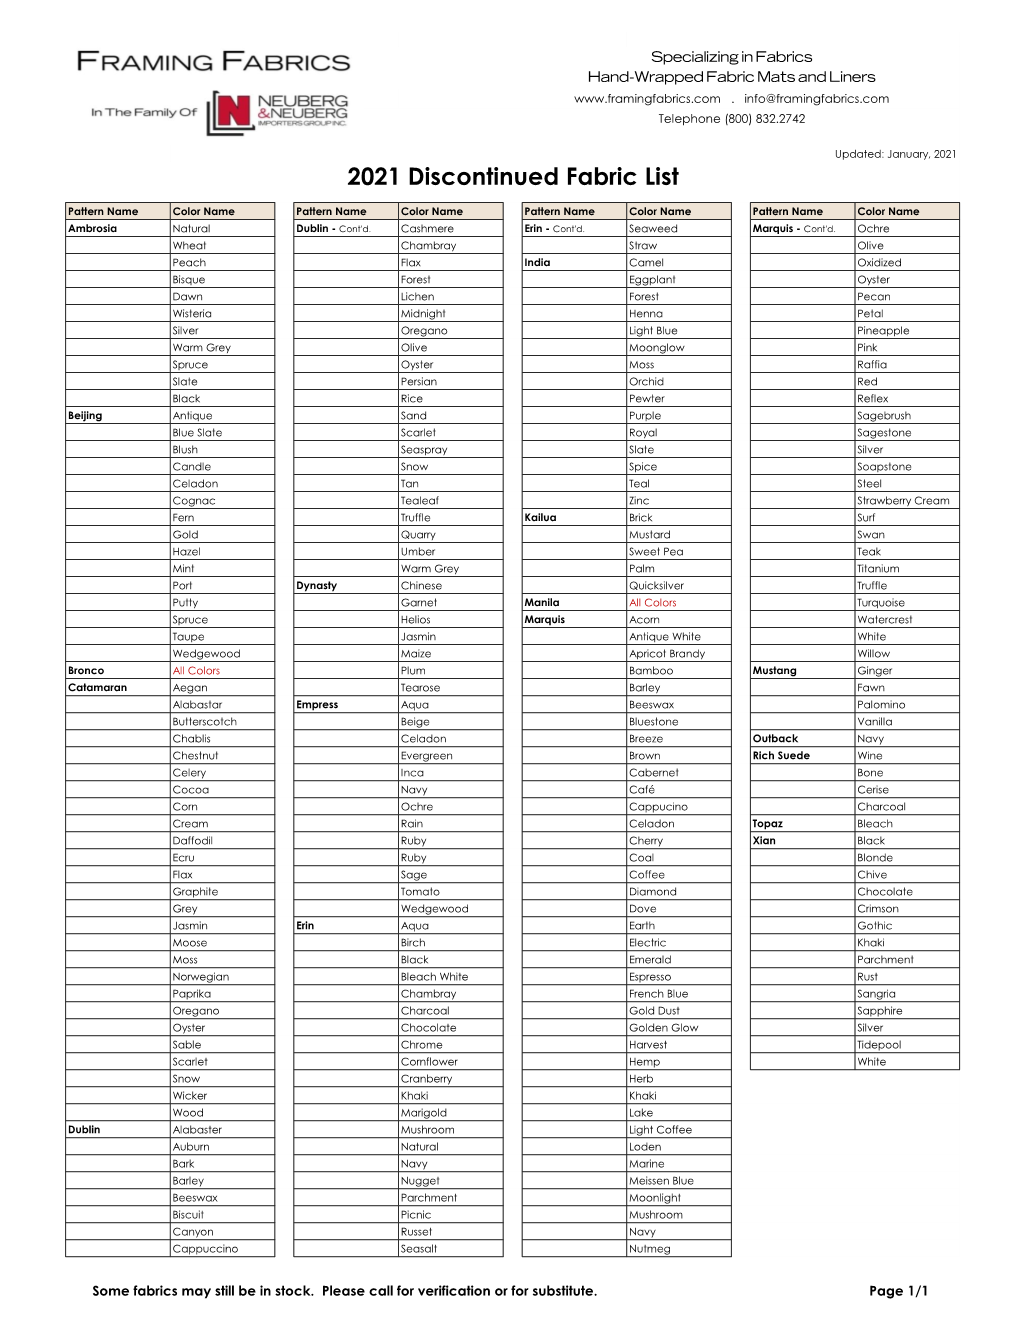 2021 Discontinued Fabric List